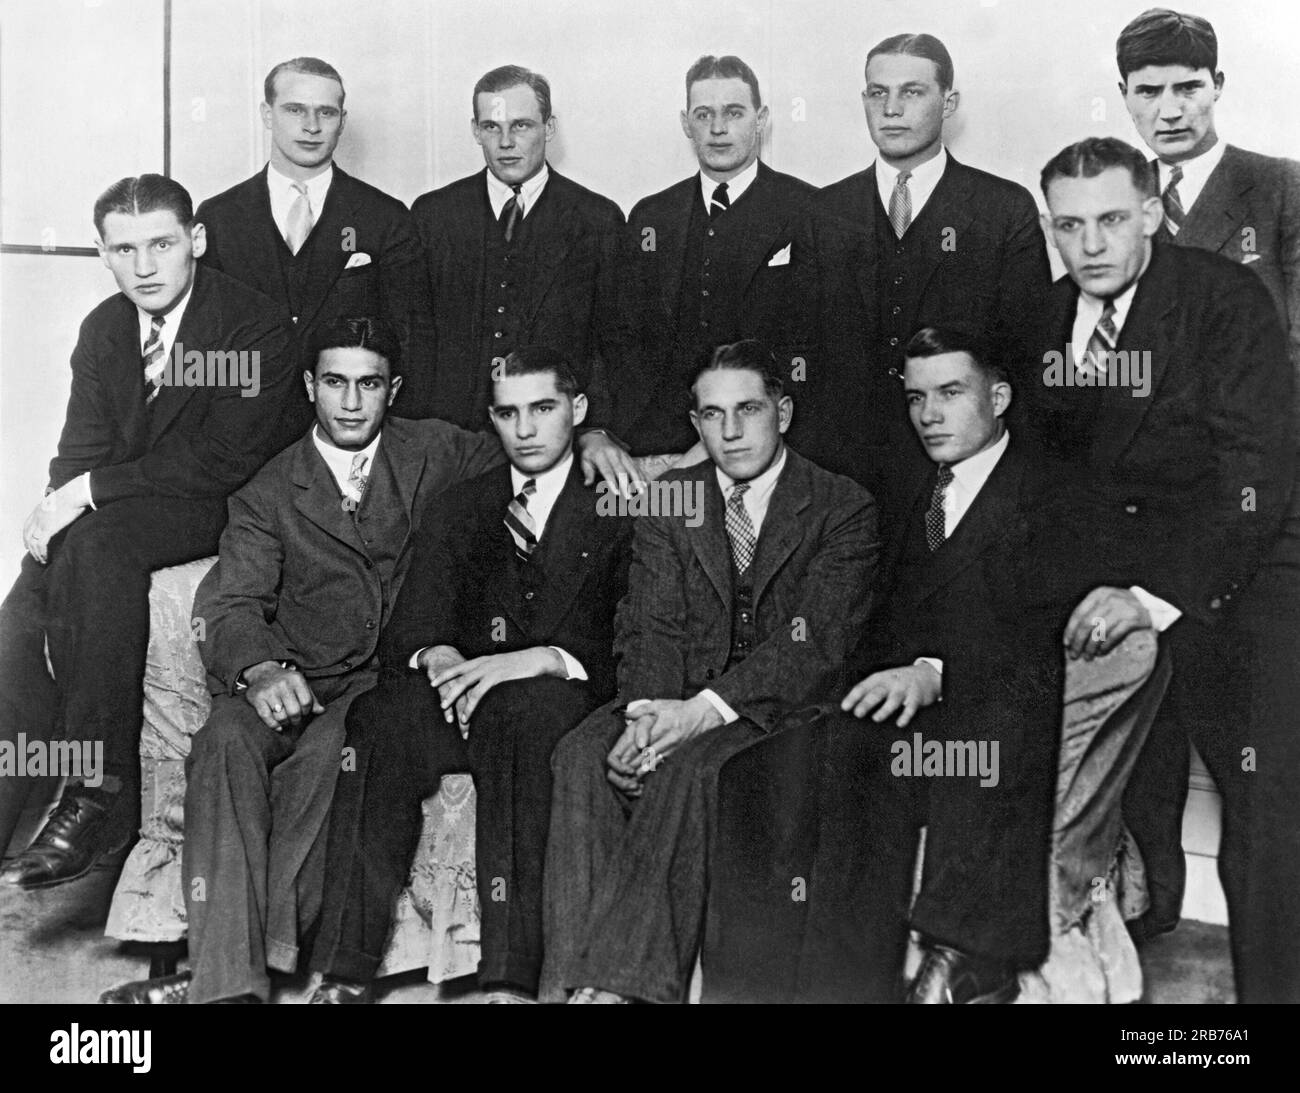 New York, New York:  December 8, 1925 A photograph of the first All-American football team ever gathered together at one time. They were guests of the NY Sun newspaper and featured at a banquet of 500 people. Top, L-R: Oberlander of Dartmouth, McMillan of Princeton,  Sturhahn of Yale, Diehl of Dartmouth, and Joss of Yale. Bottom, L-R: Tully of Dartmouth, Friedman of Michigan, Oosterbaan of Michigan, Tryon of Colgate, Weir of Nebraska, and 'Red' Grange of Illinois. Stock Photo